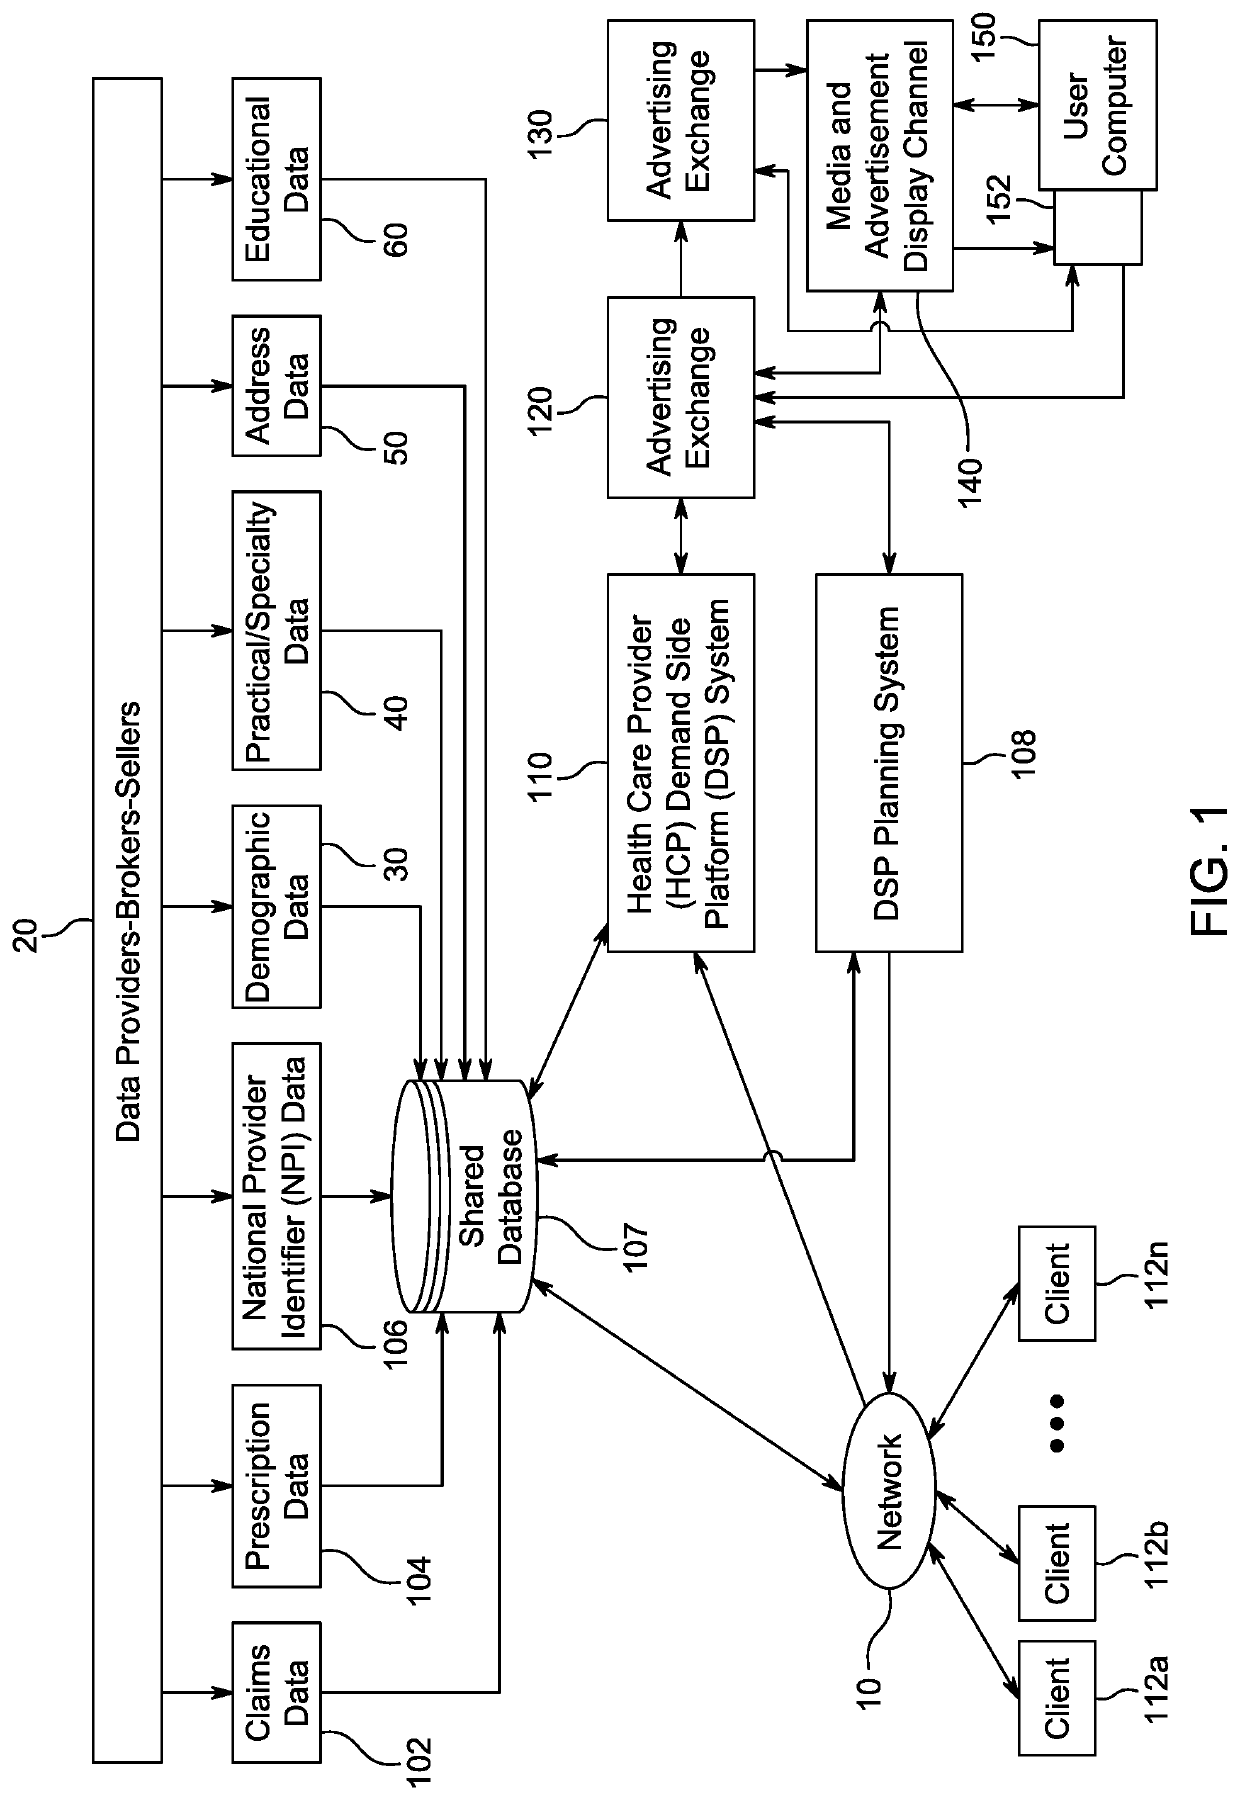 Integrated searching of non-media data and media data in campaign planning